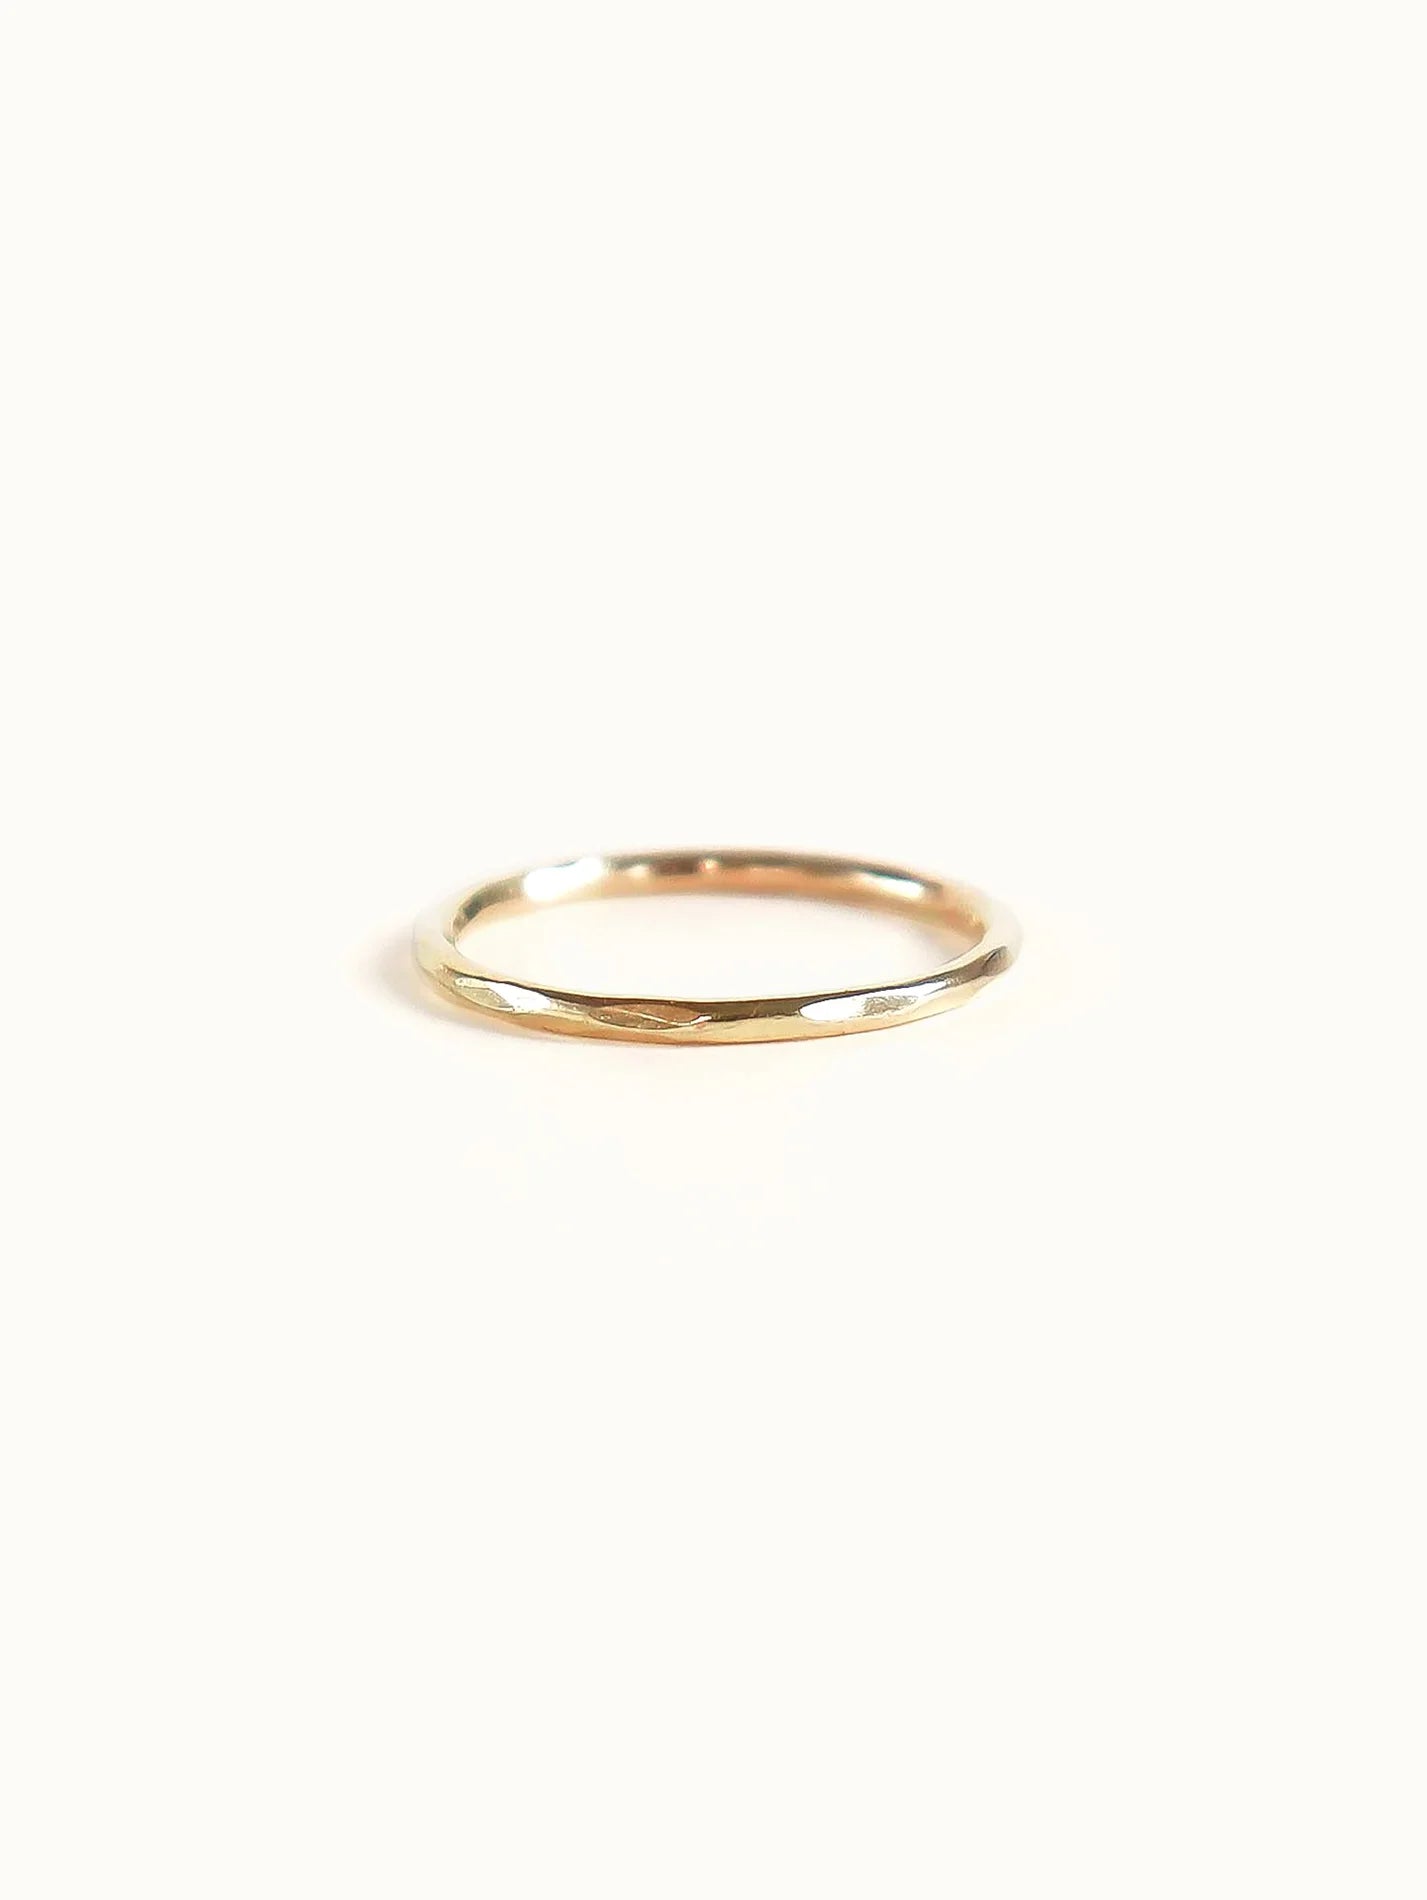 Hammered stacking ring